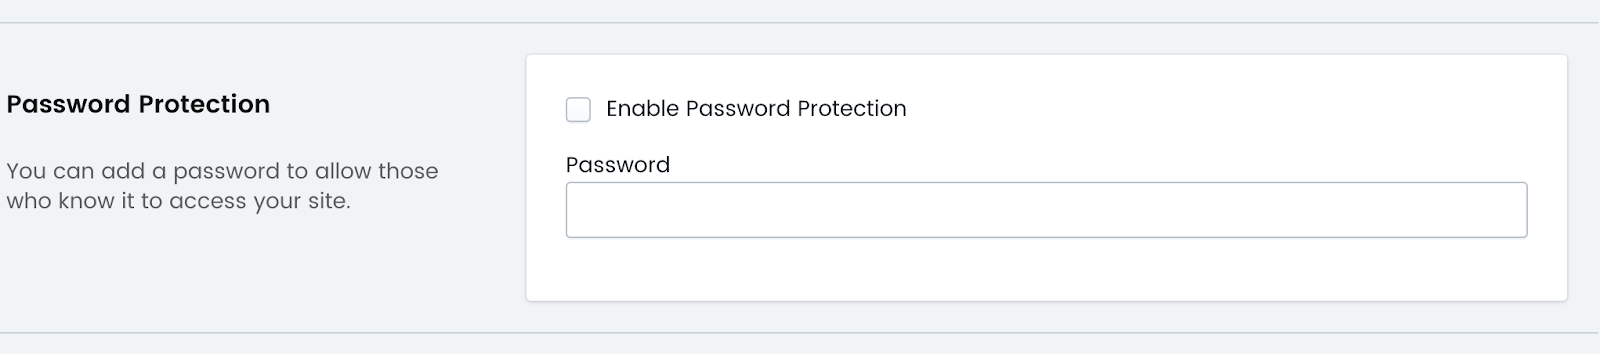 Image of the Password Protection section